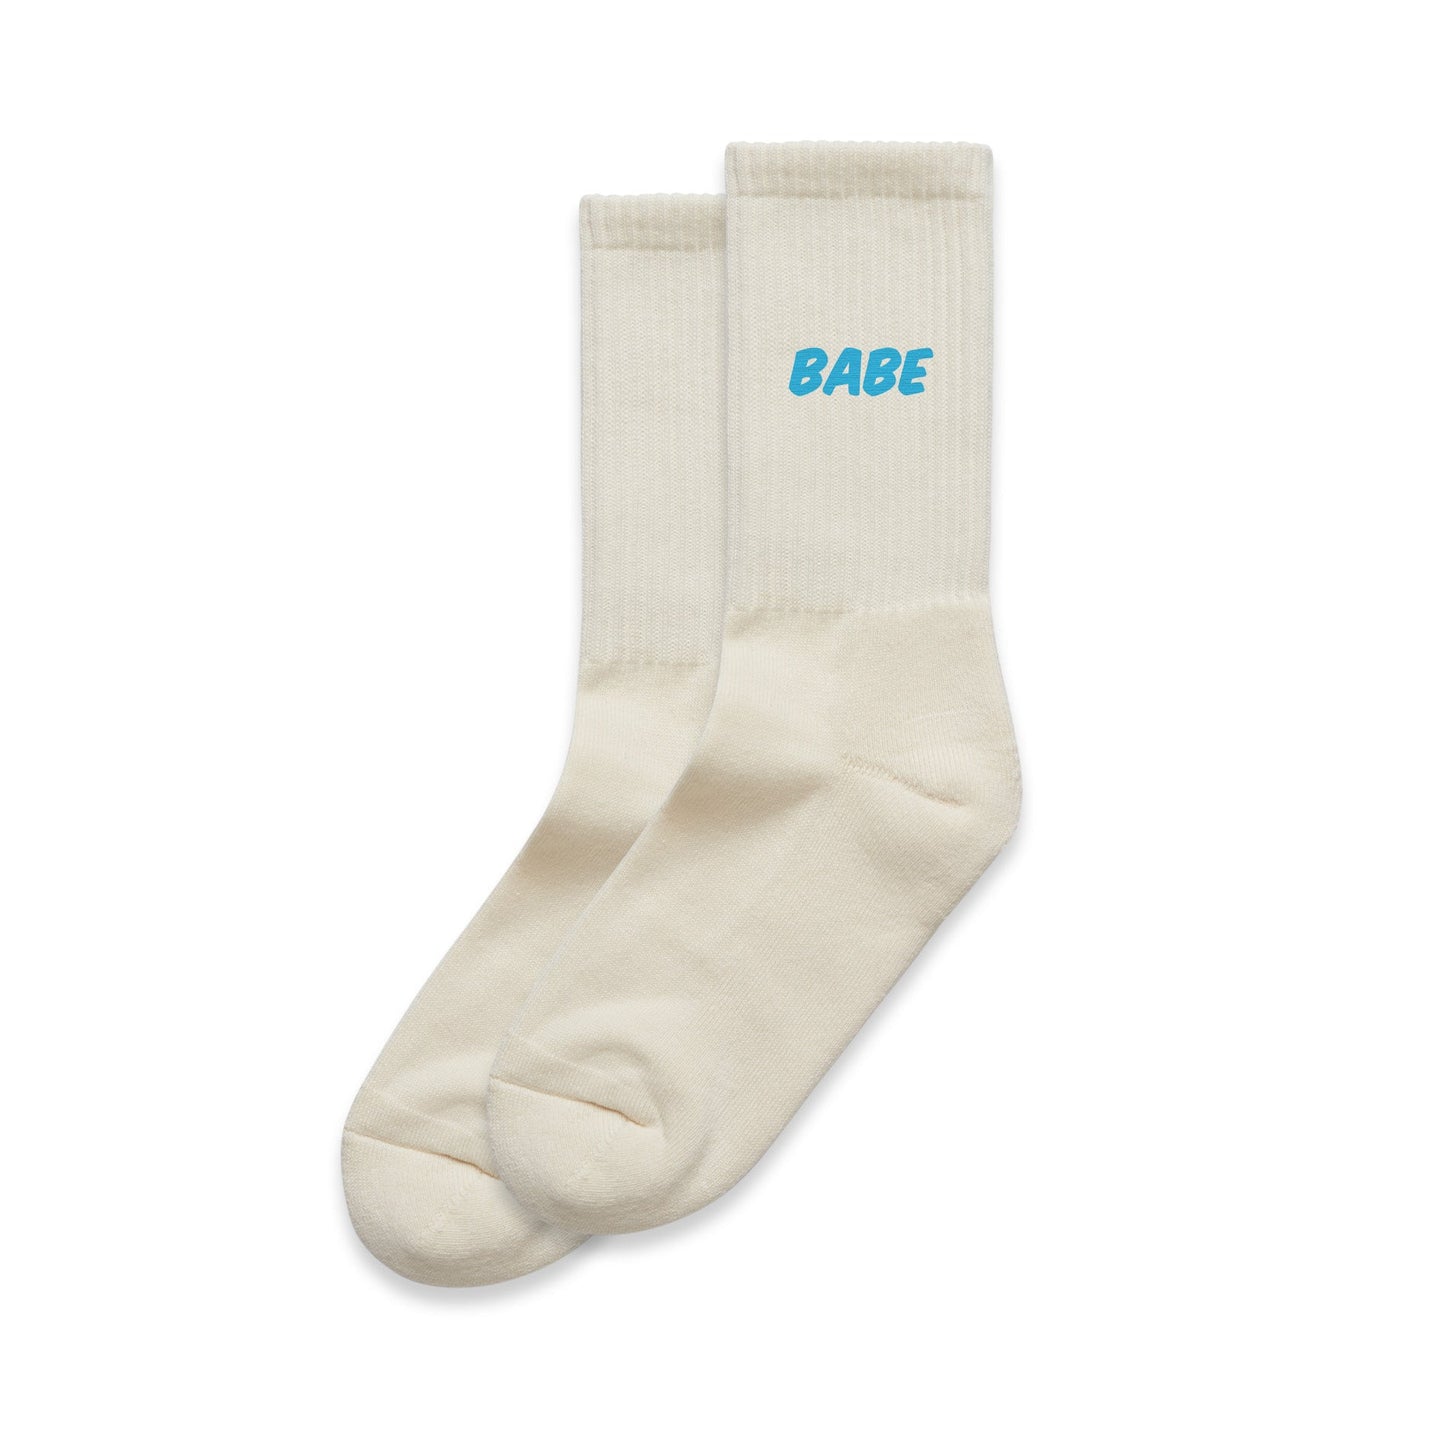 NEW! Babe Socks (Blue embroidery)